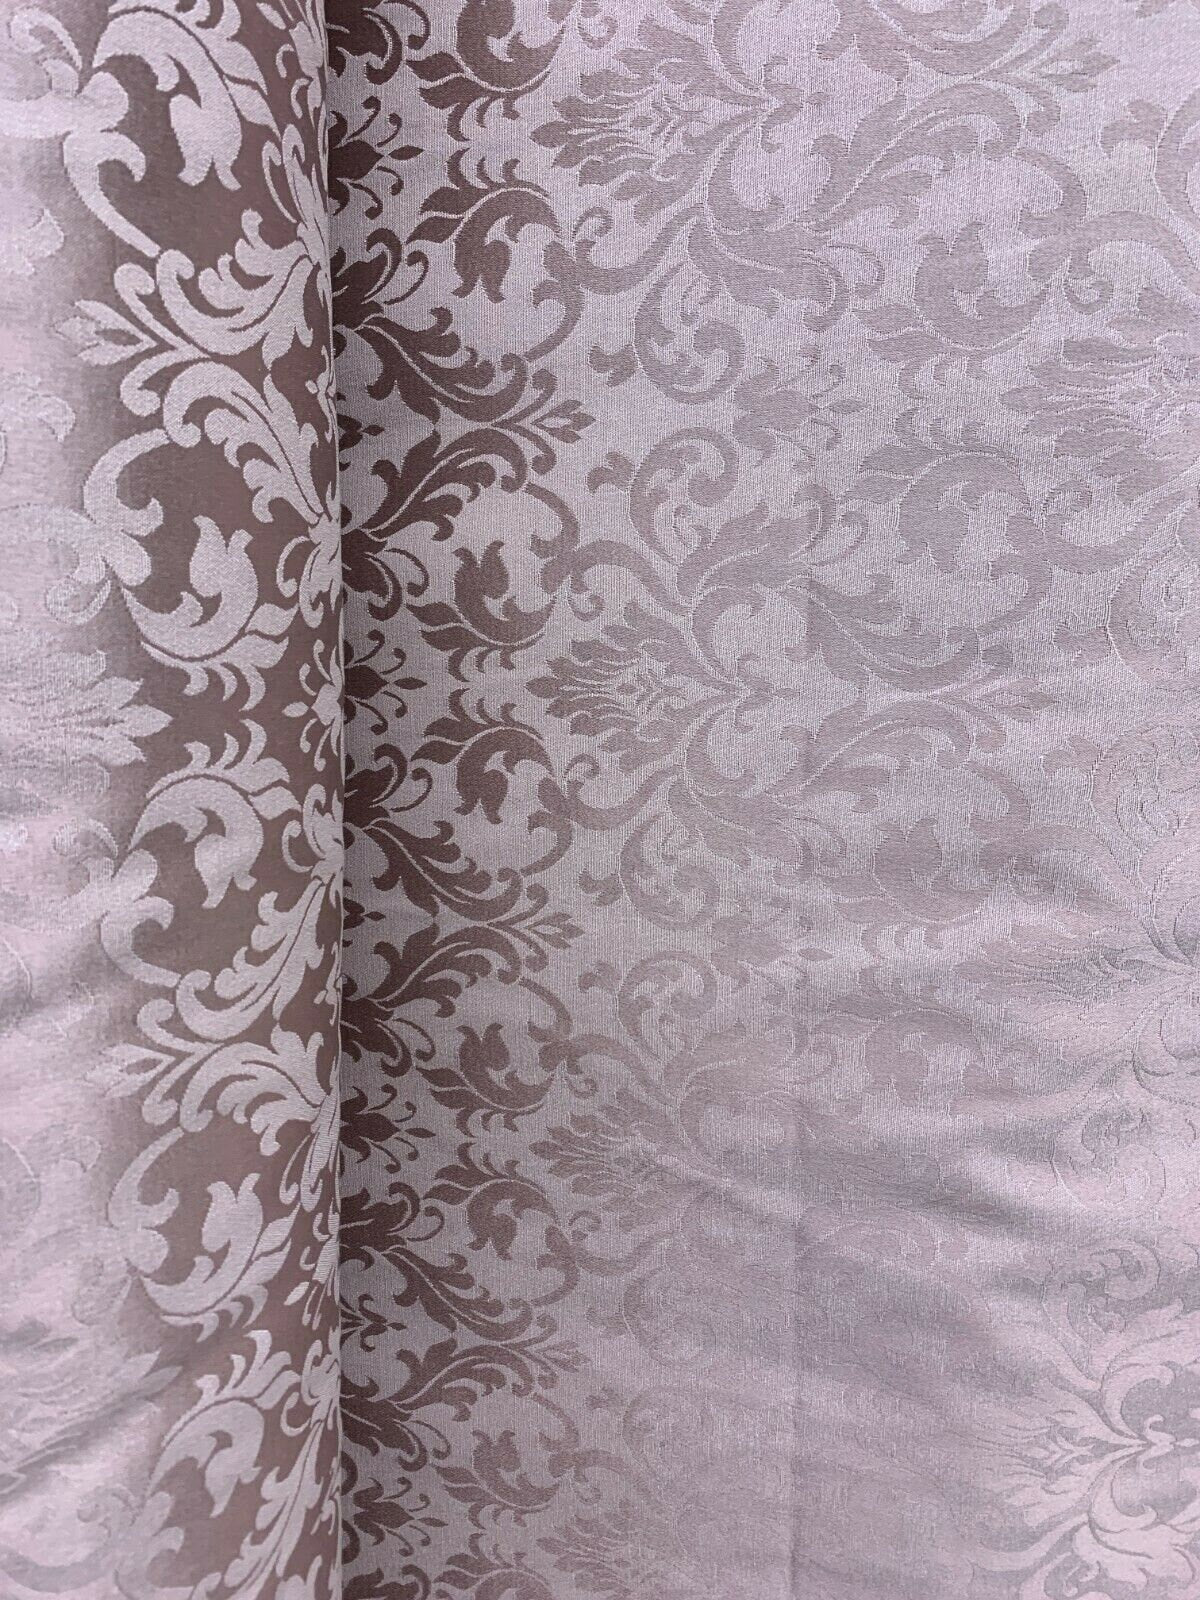 PALE ROSE Damask Brocade Upholstery Drapery Fabric (54 in.) Sold By The Yard